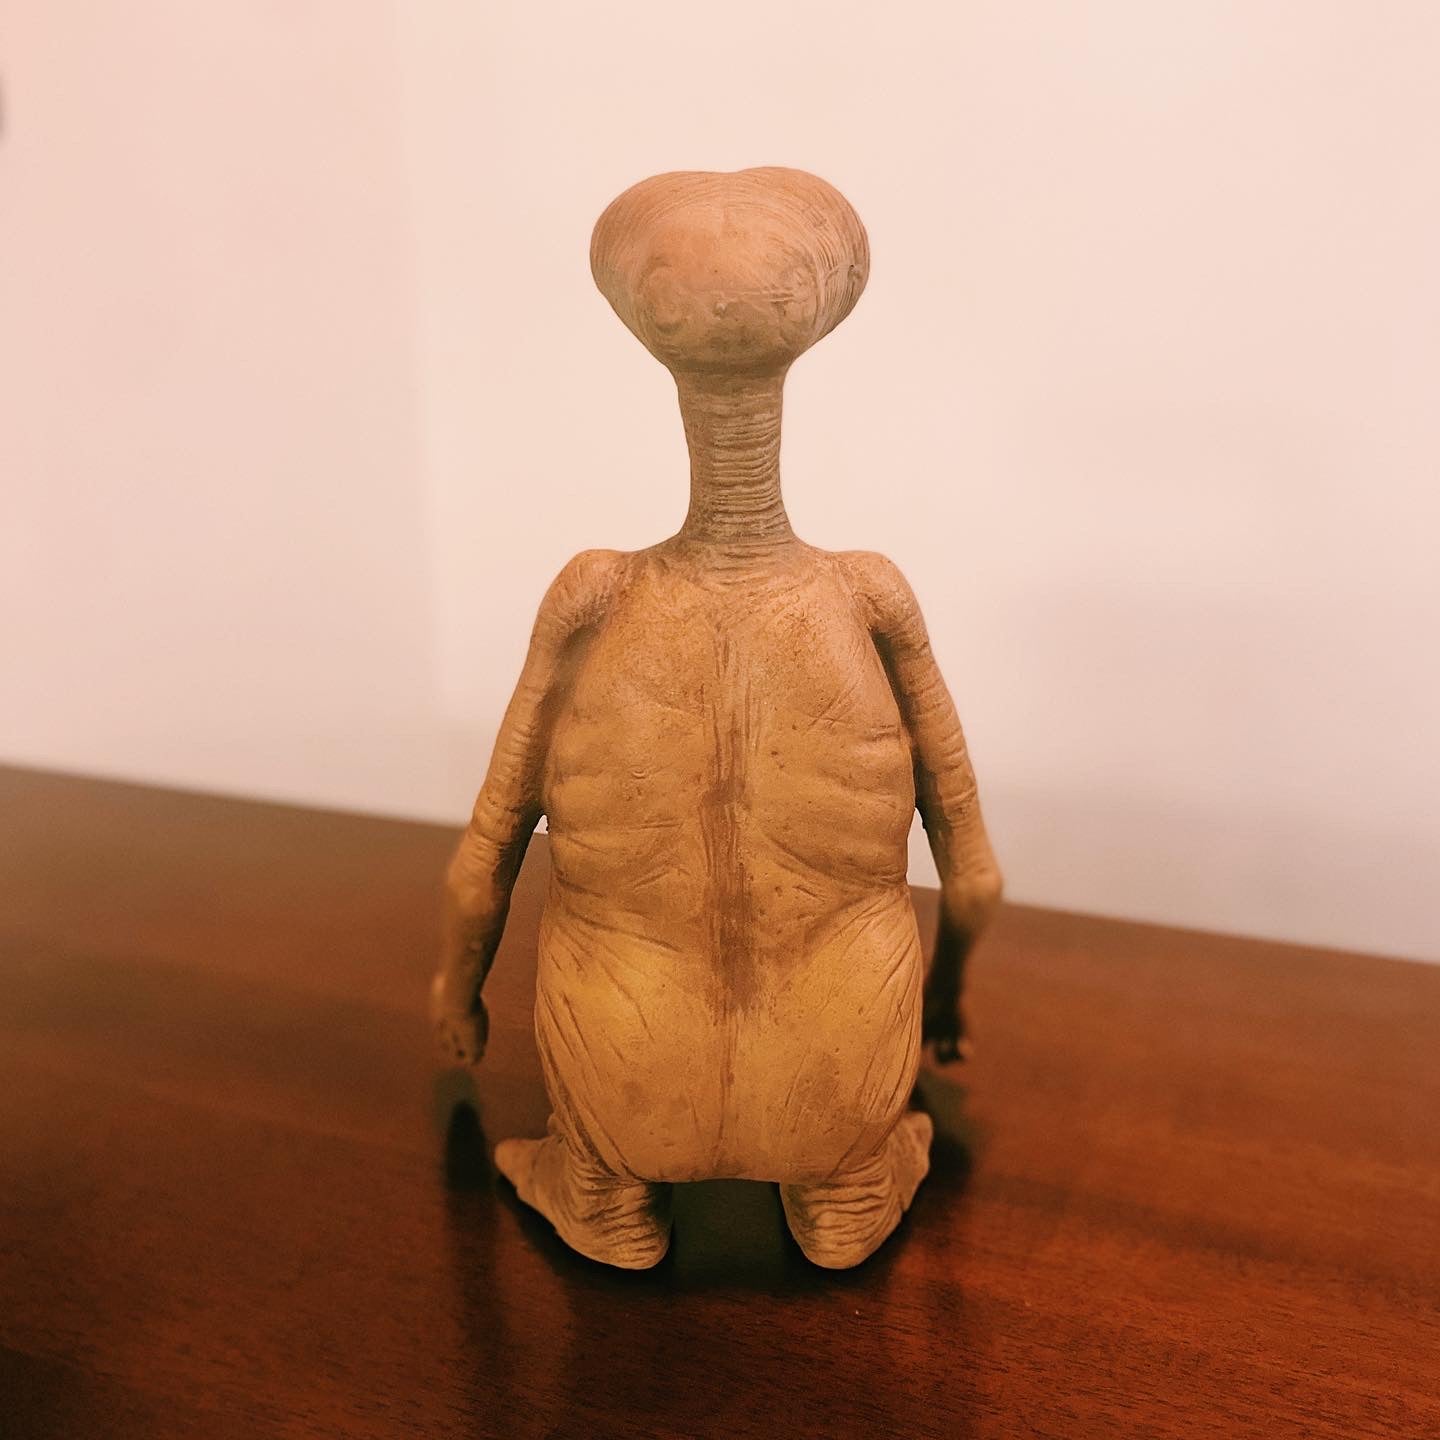 E.T. the Extra-Terrestrial 玩具